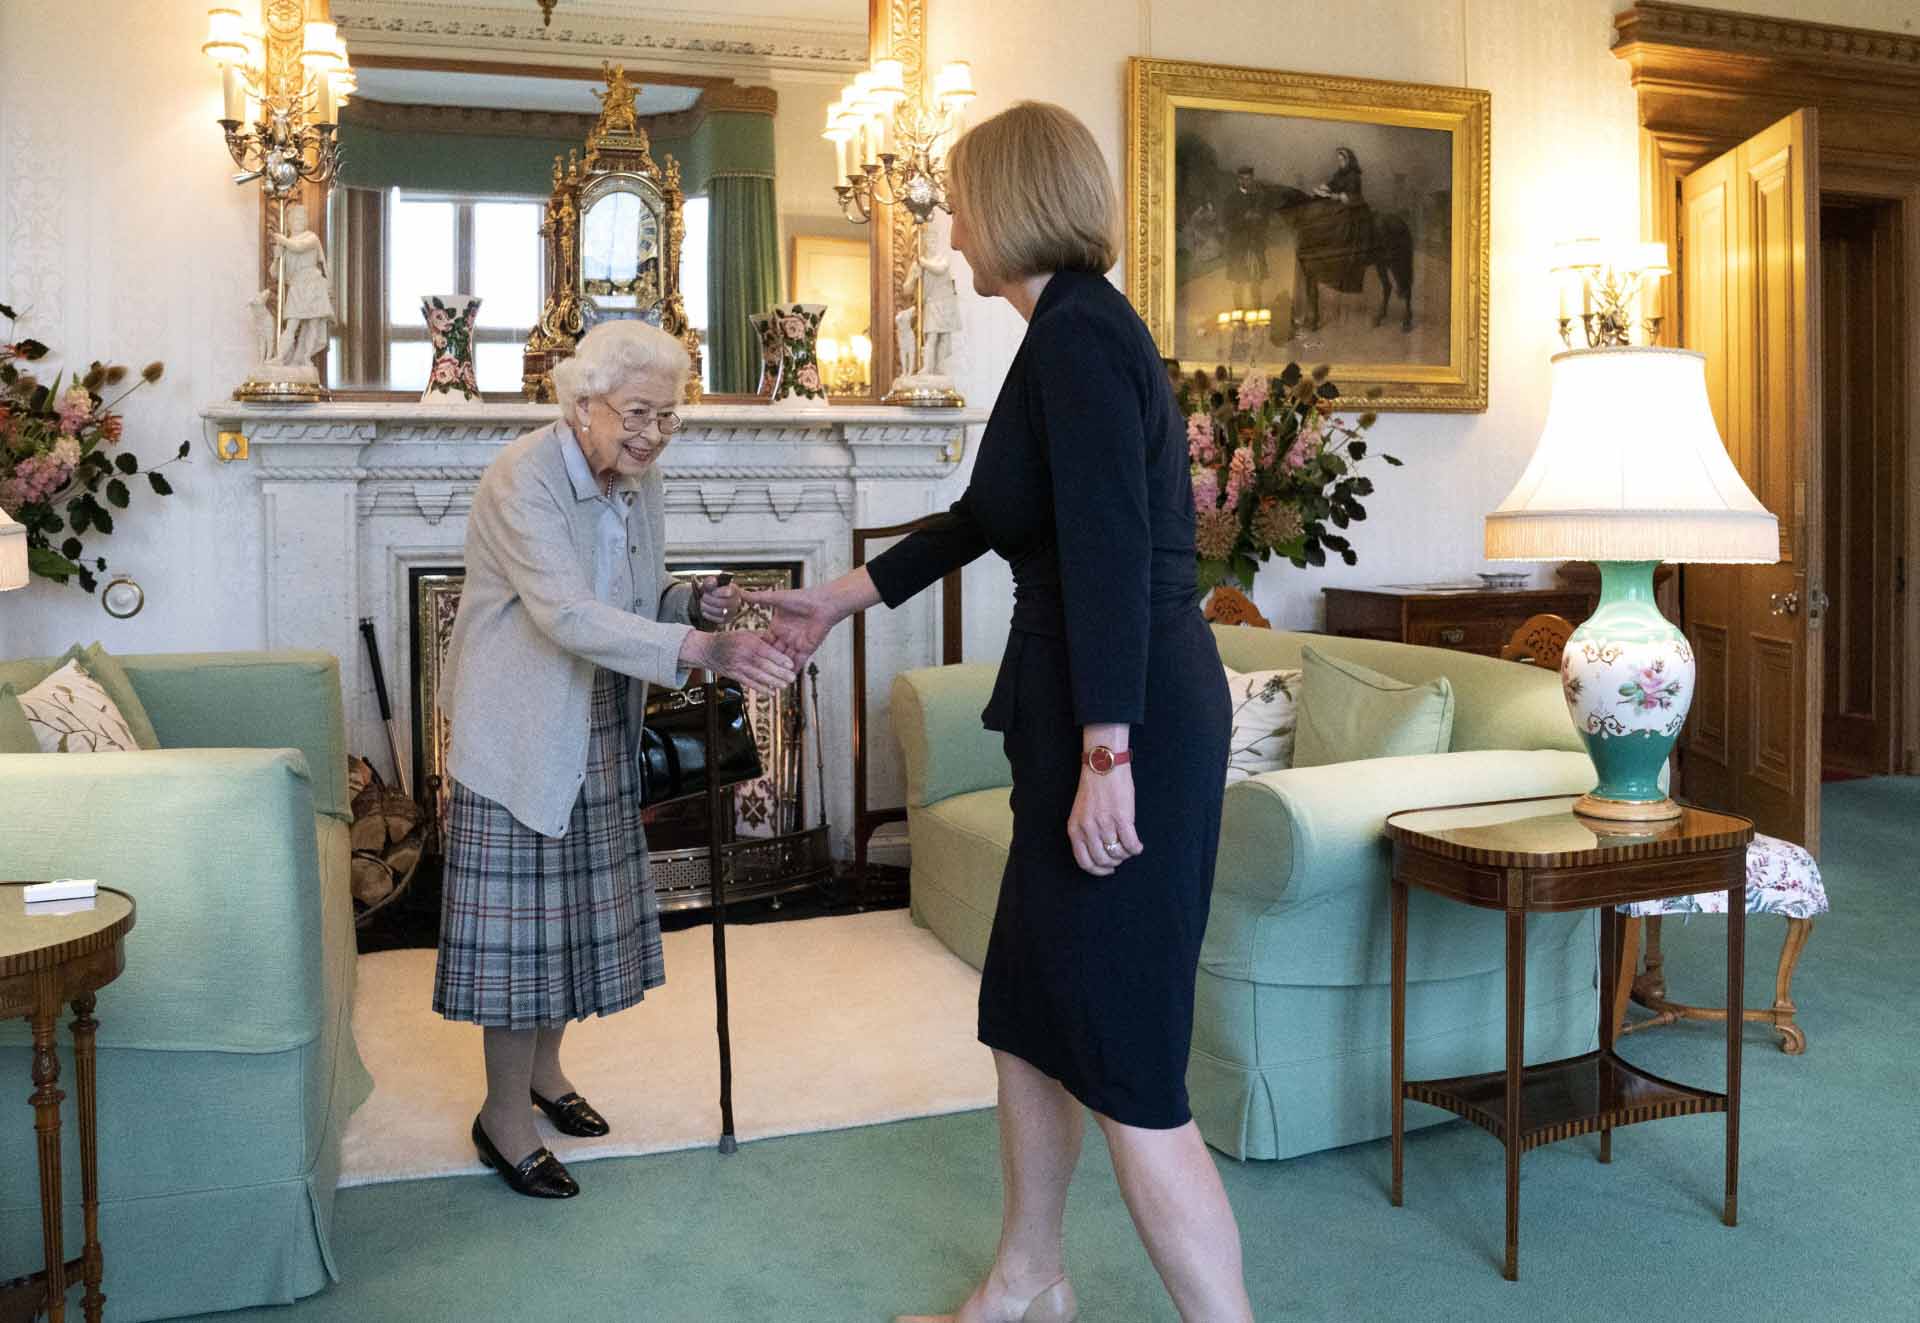 Britain’s Queen Elizabeth II, left, welcomes Liz Truss during an audience at Balmoral, Scotland, where she invited the newly elected leader of the Conservative party to become Prime Minister and form a new government, Tuesday, Sept. 6, 2022.